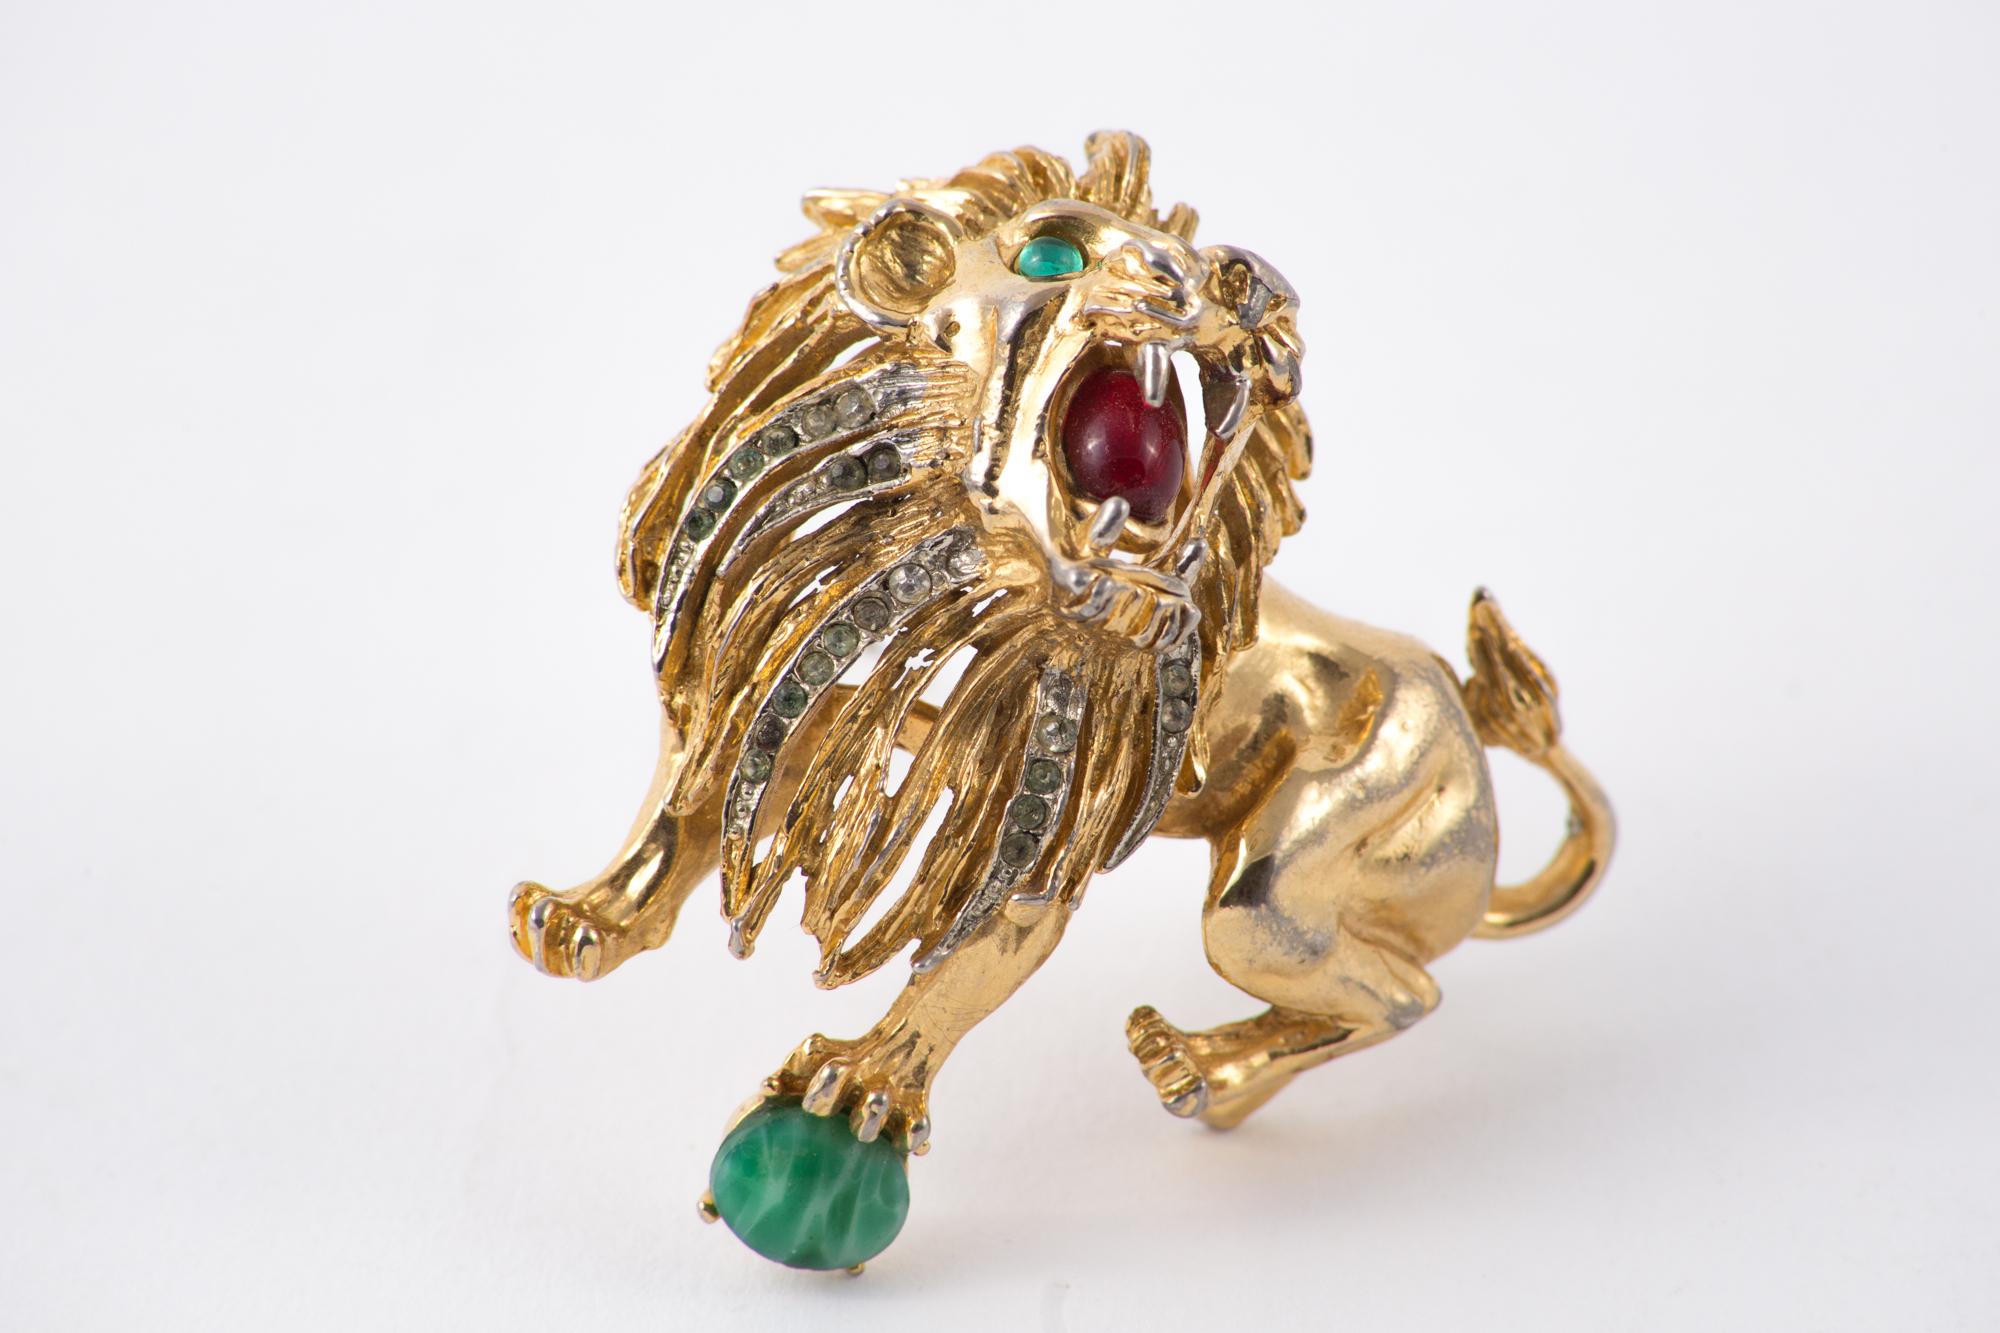 1970s lion animal gold tone brooch featuring green strass for eyes, beads and strass, a back safety brooch pin.
Length: 2.3in. (6cm)
Width: 2in. (5.5cm)
Please note this item is in good condition with minor wear consistent with age and use. (please